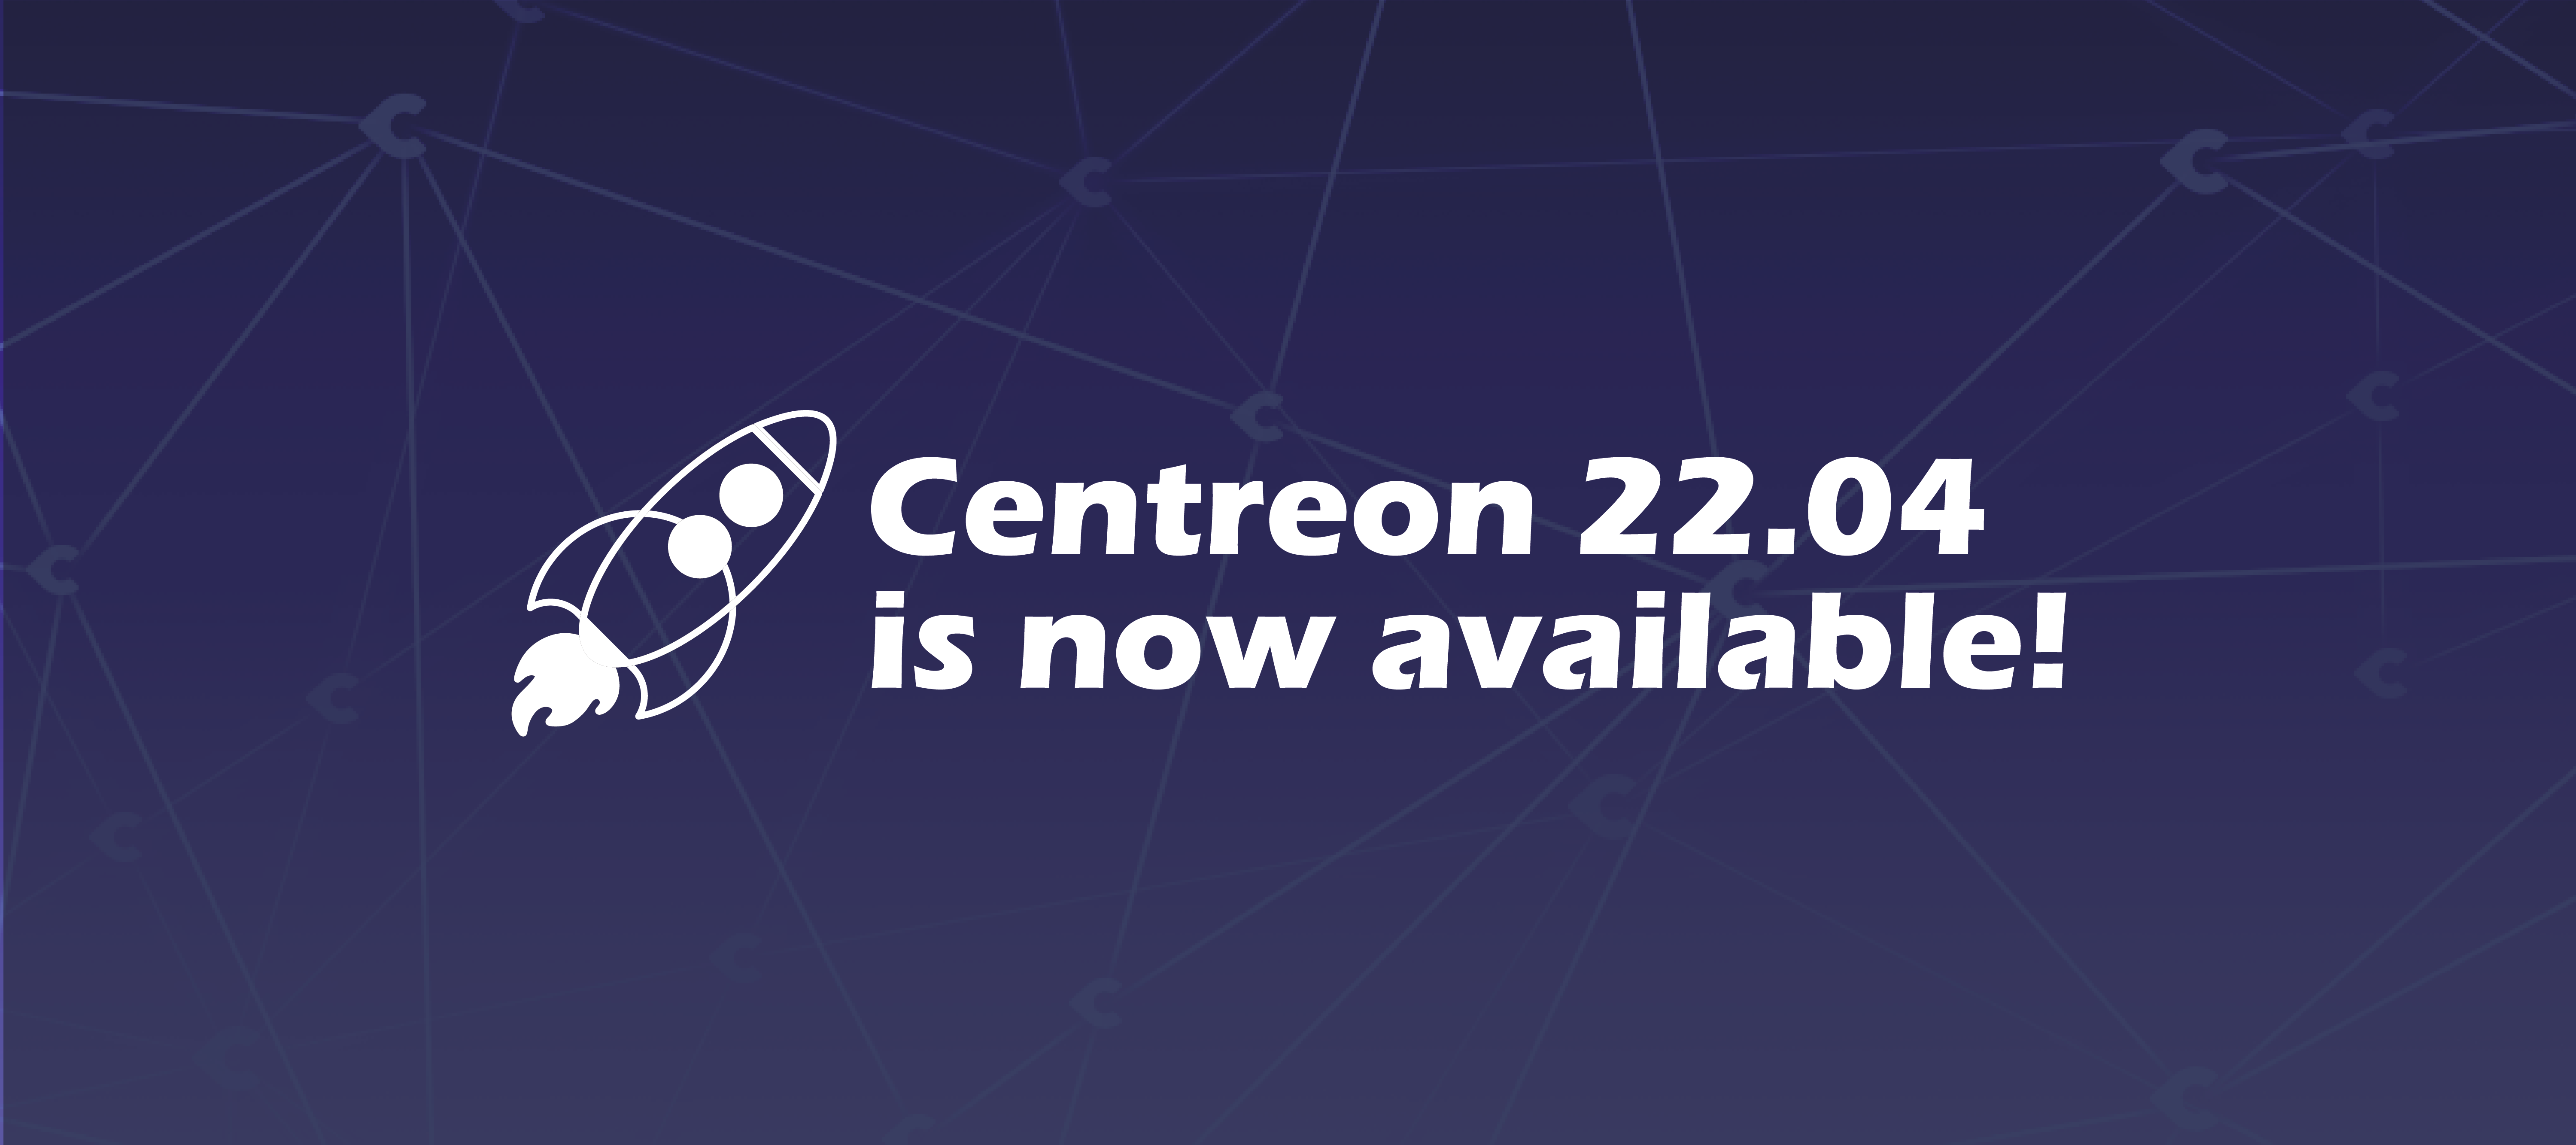 Centreon 22.04 is now available!